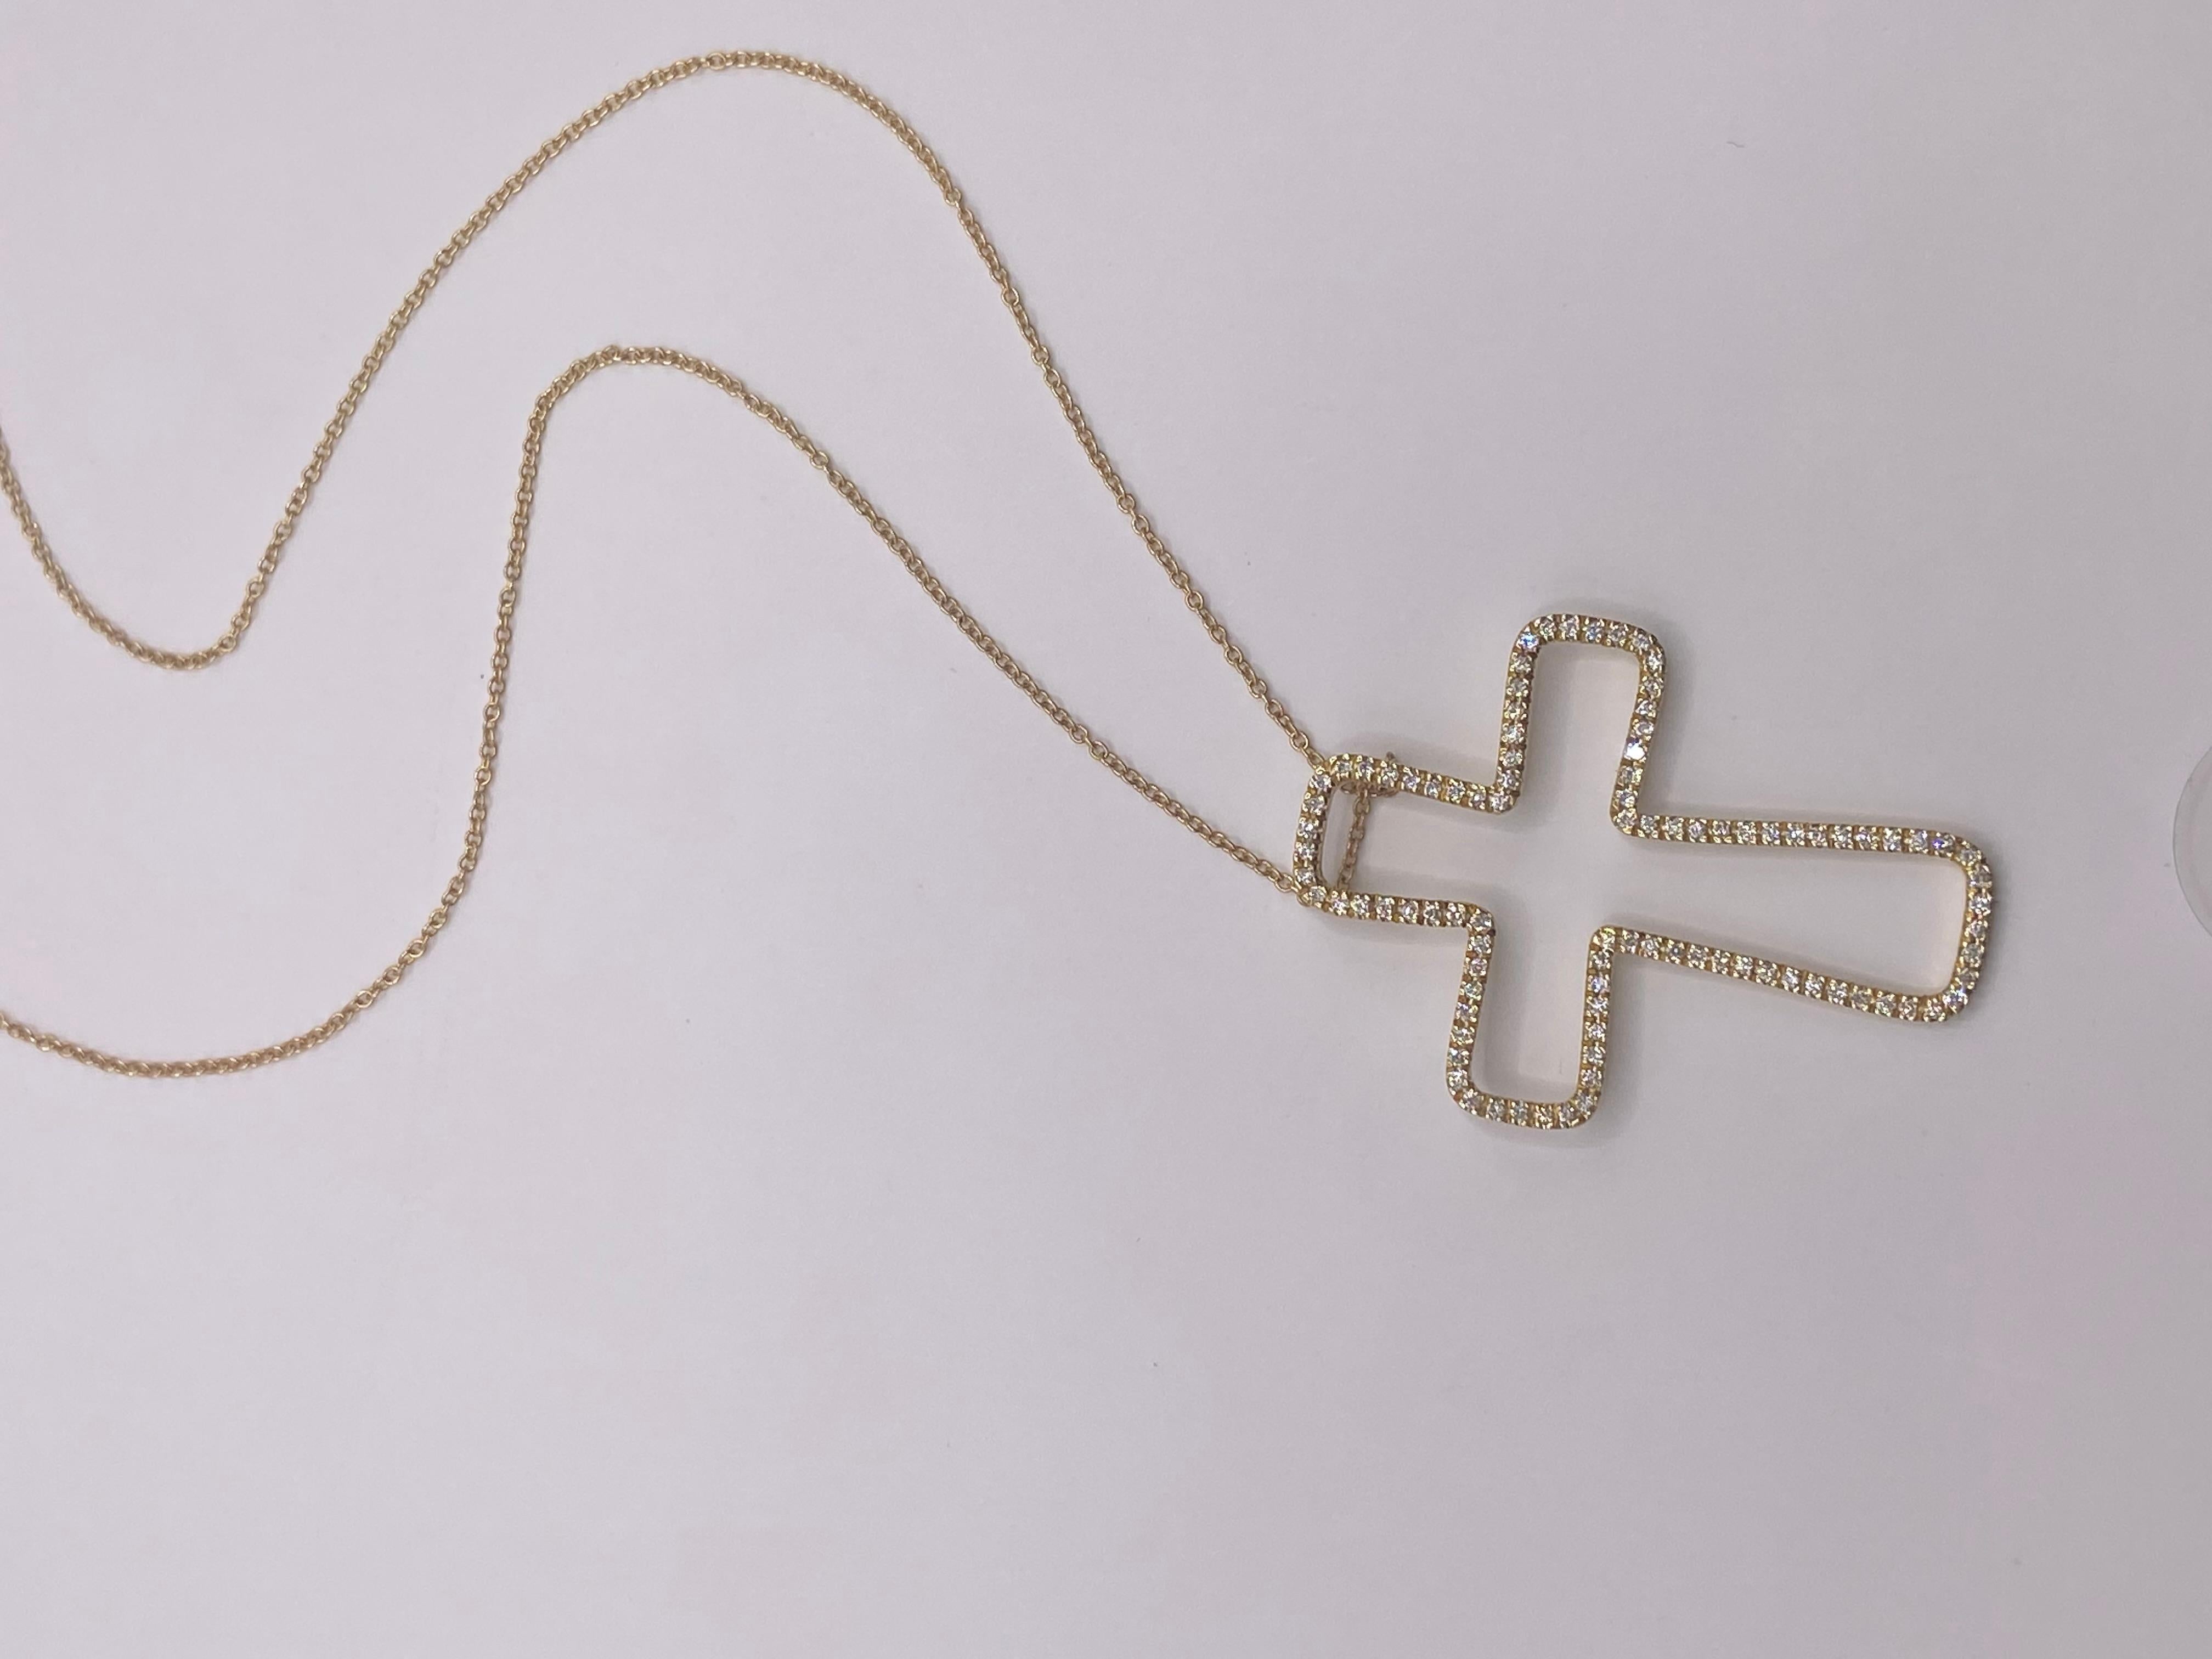 Metal: 18KT Yellow Gold
Chain Length: 18